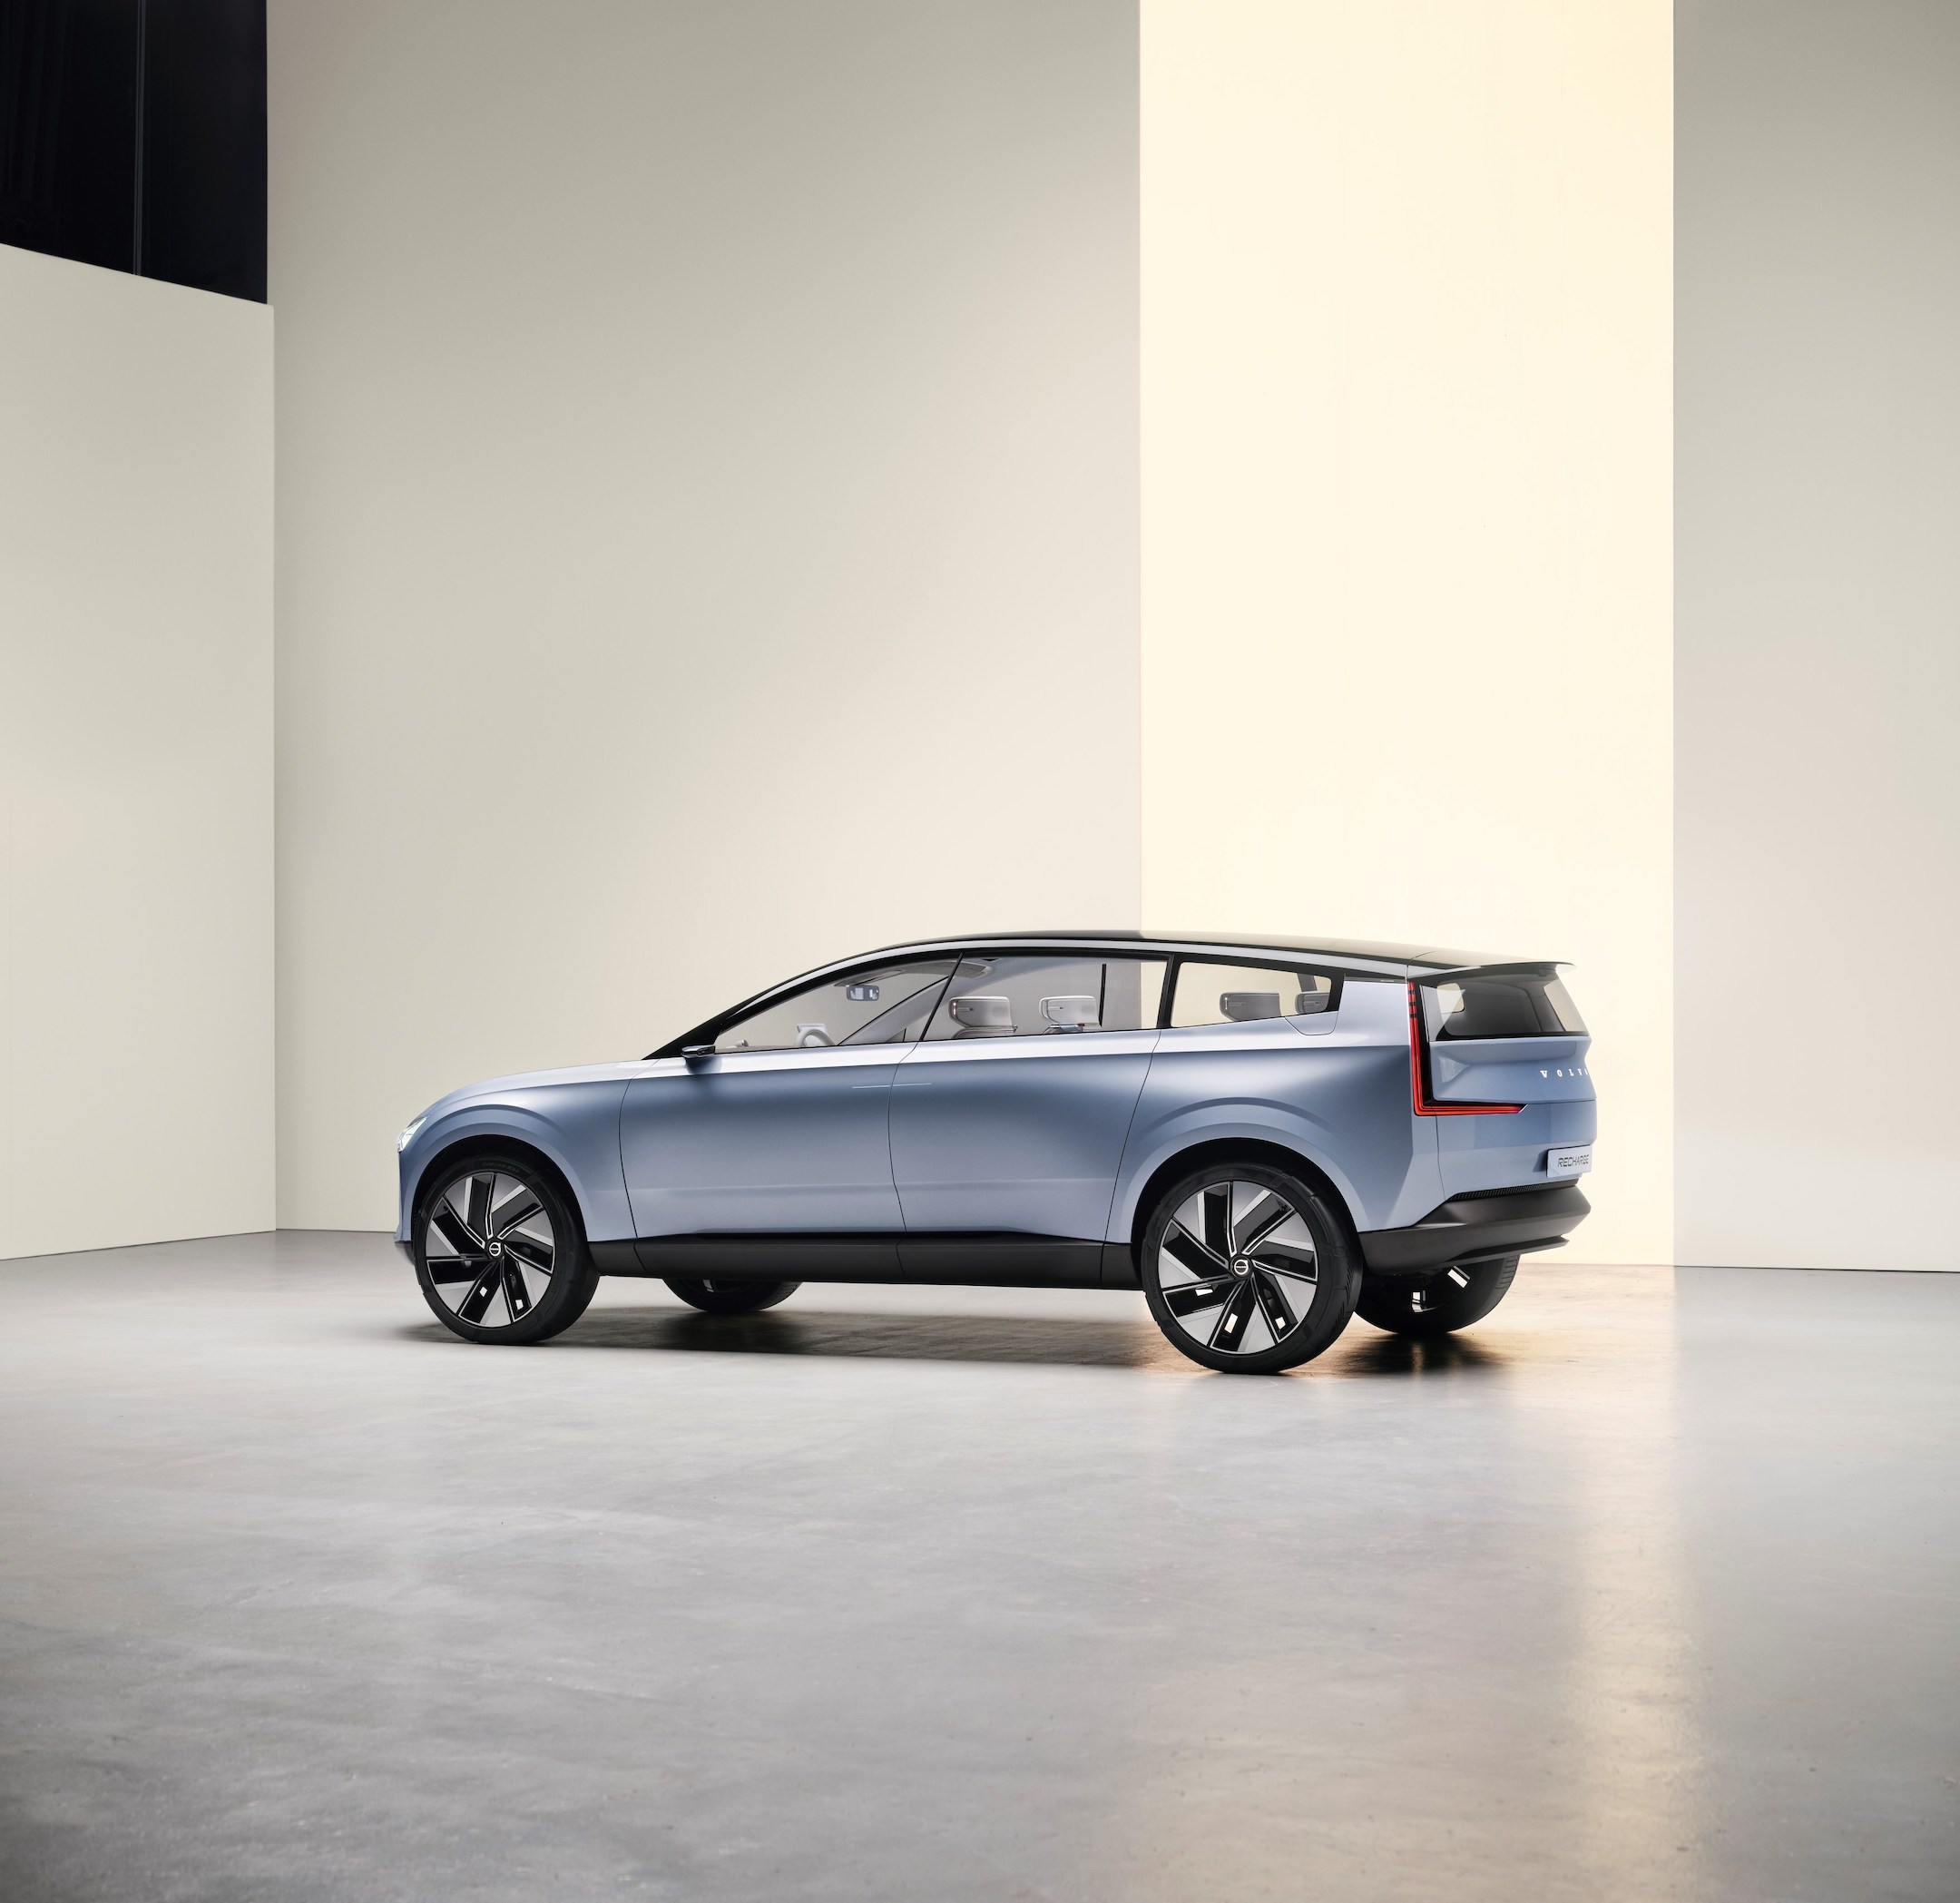 Volvo Cars expects to deliver its electric SUV by 2024